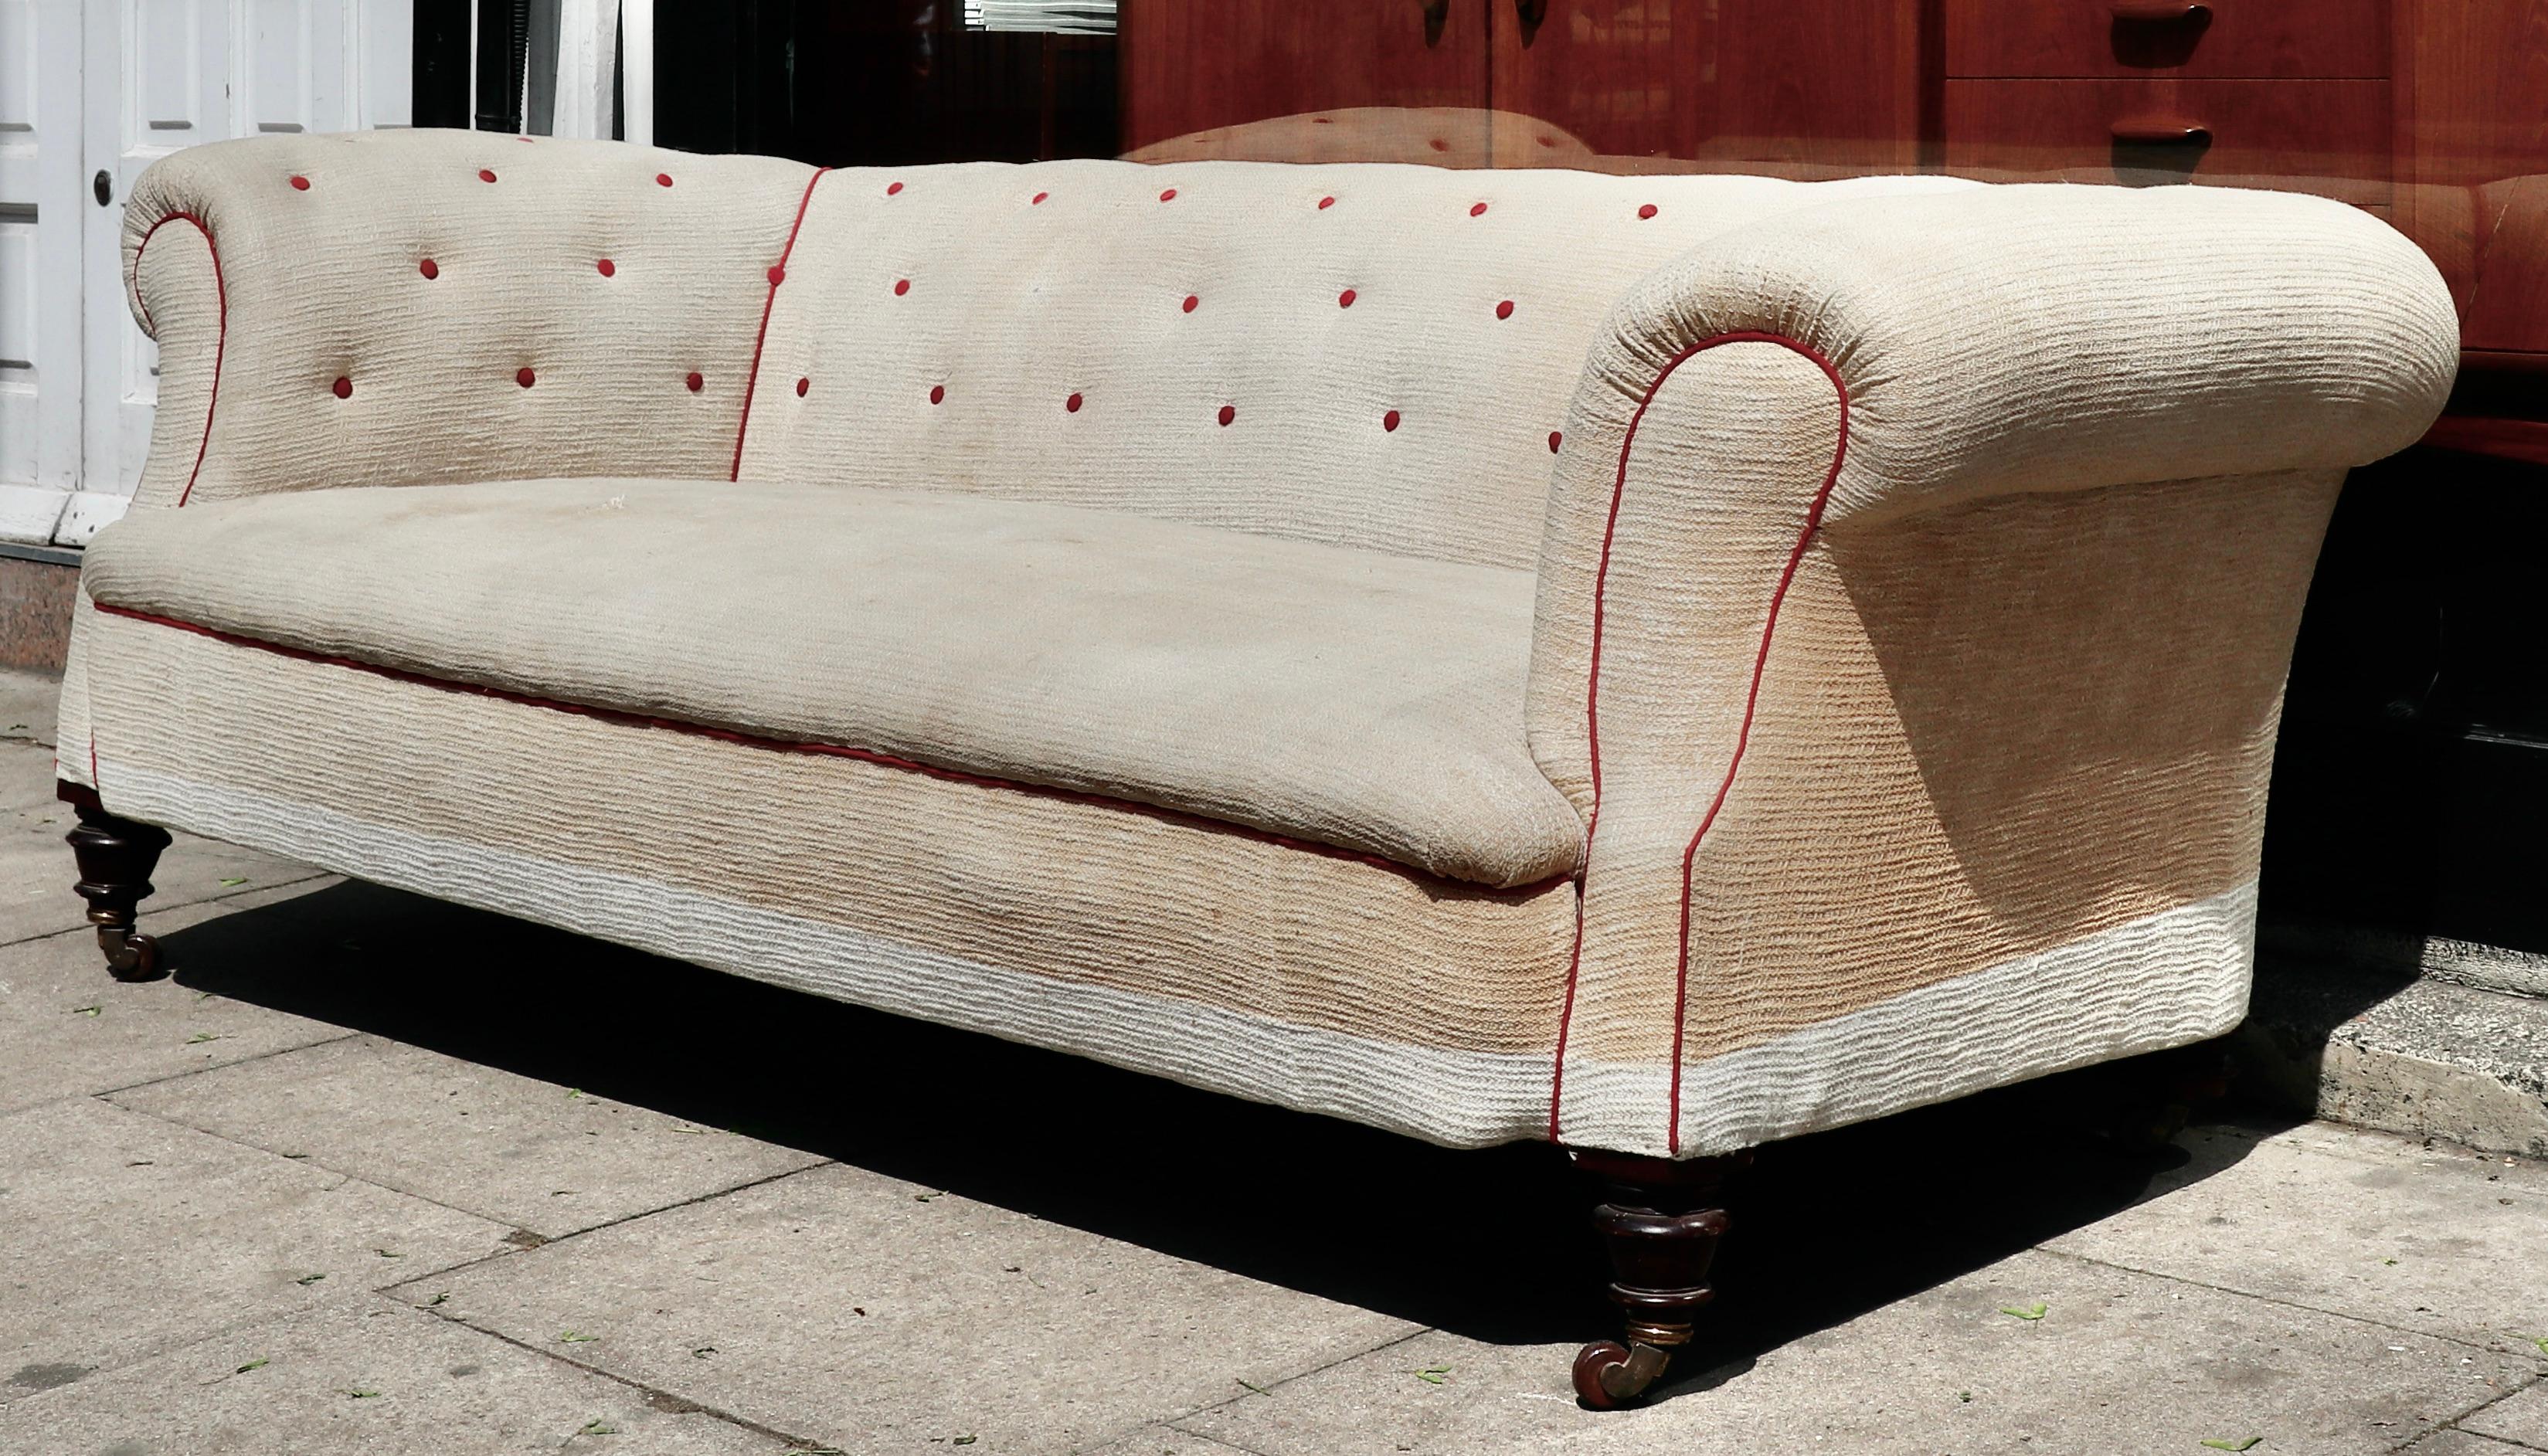 This is a superb quality large Victorian chesterfield sofa dating from around 1890.

The sofa is in need of reupholstery as the fabric is discoloured and worn. The front legs are intact but the rear ones have been cut down. The castors are original